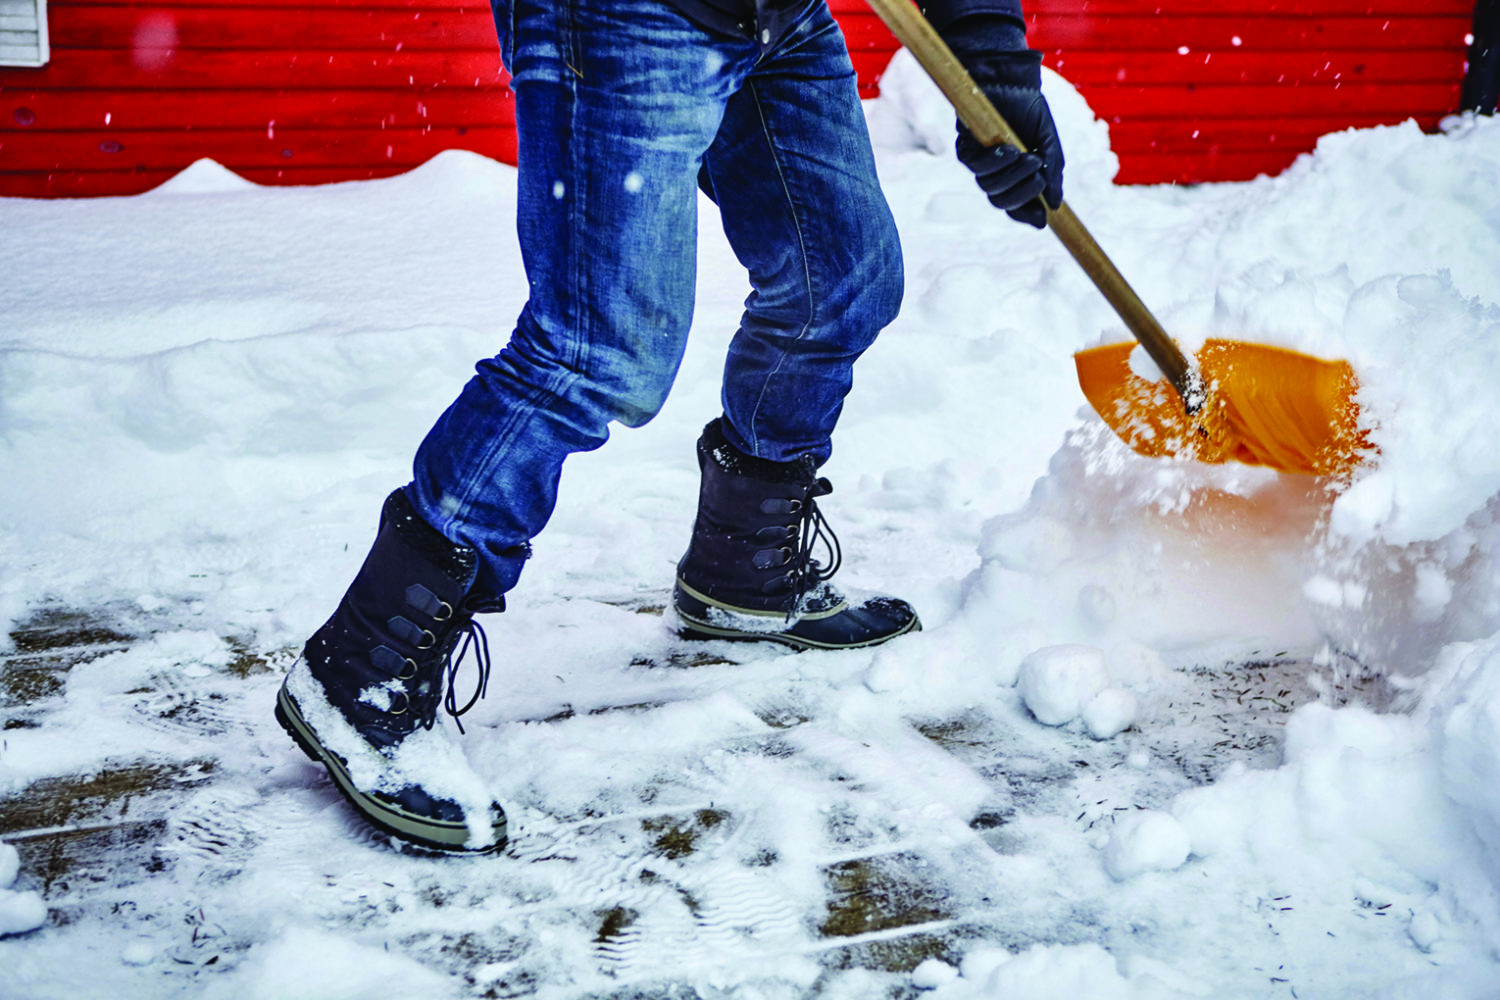 Avoid a heart attack while shoveling snow